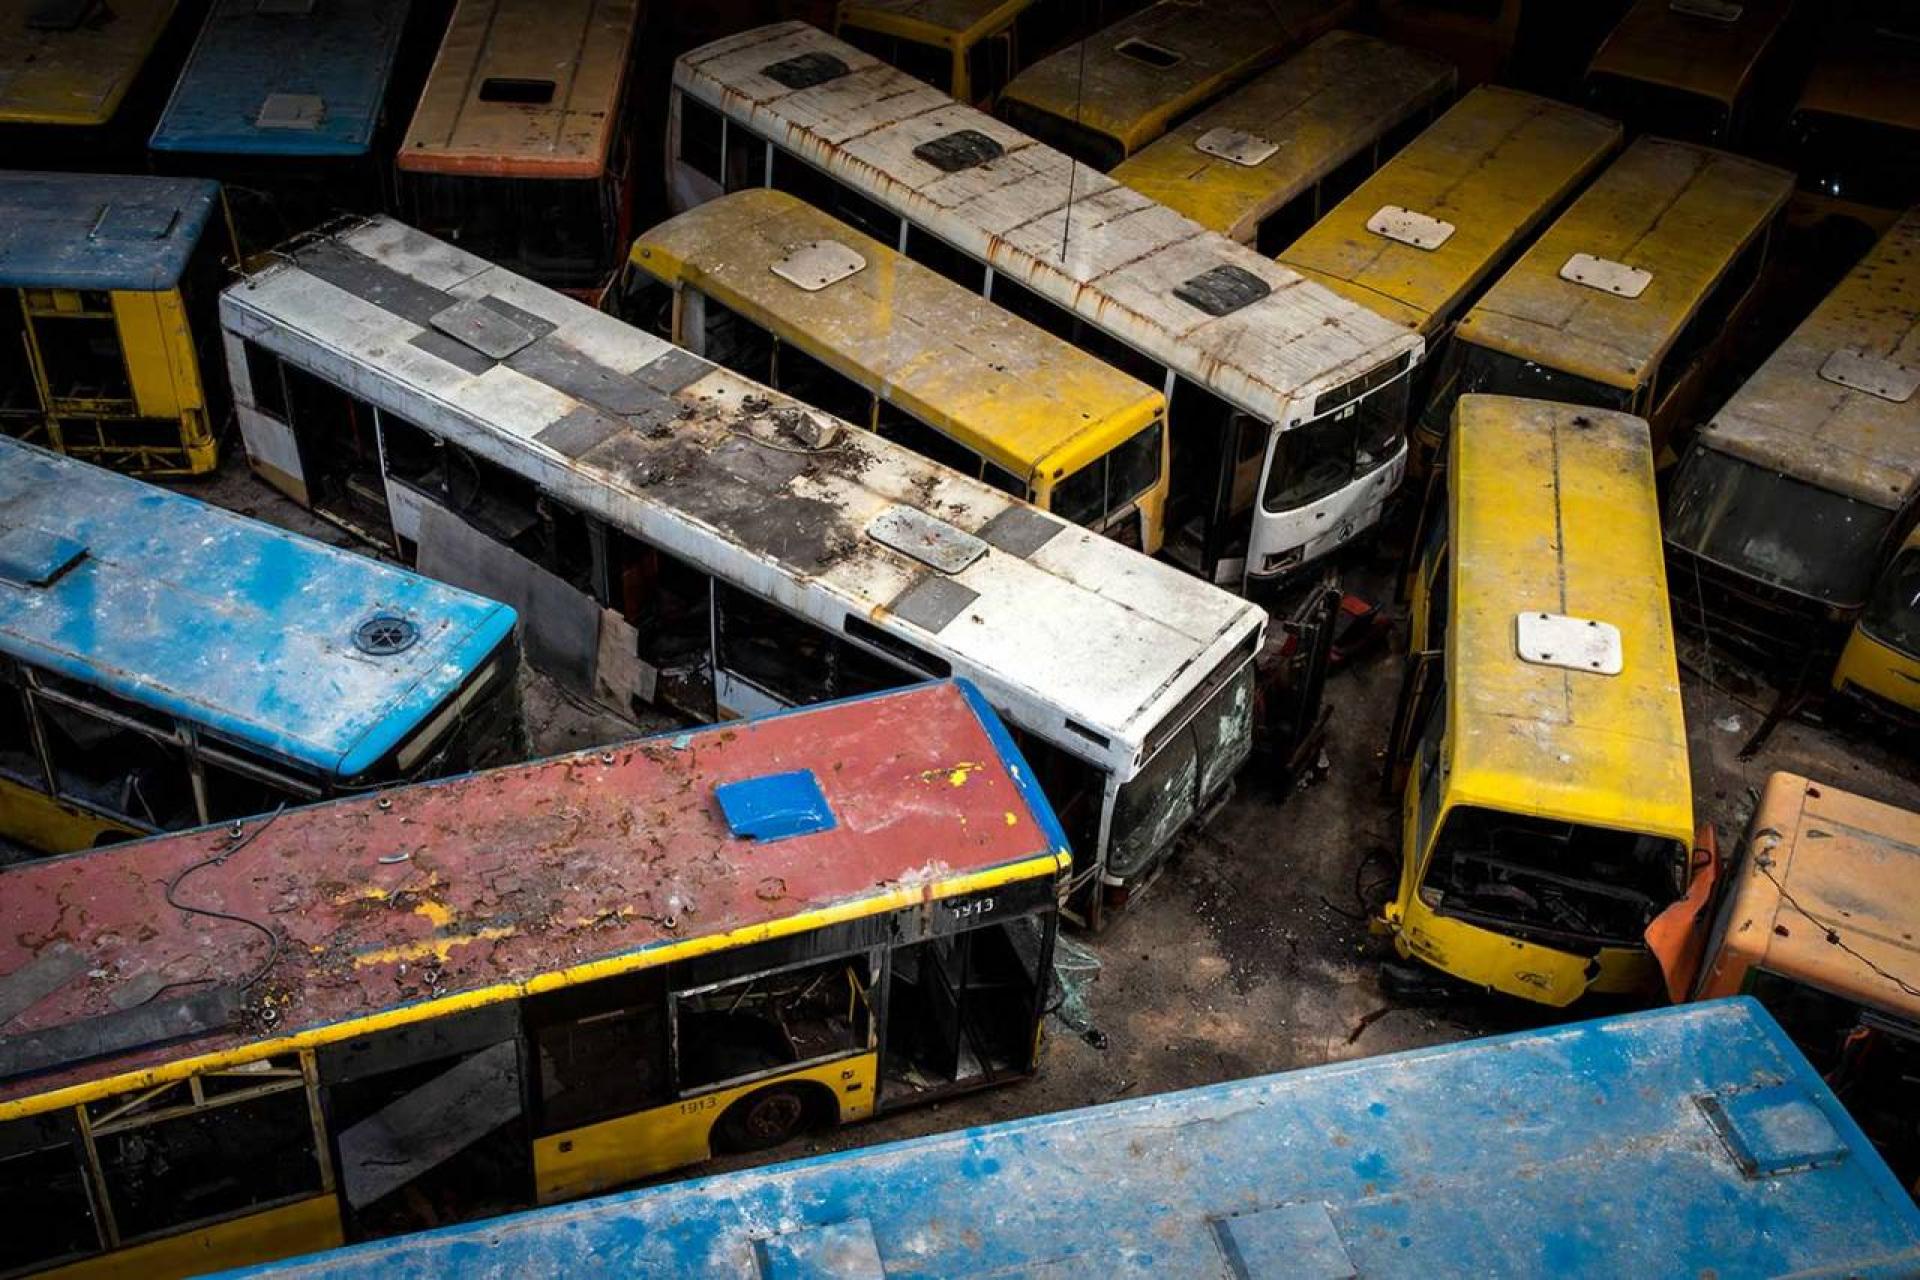 Since it was officially closed in 2015, almost 1,000 buses have been stored inside the abandoned building. | Photo © Darmon Richter